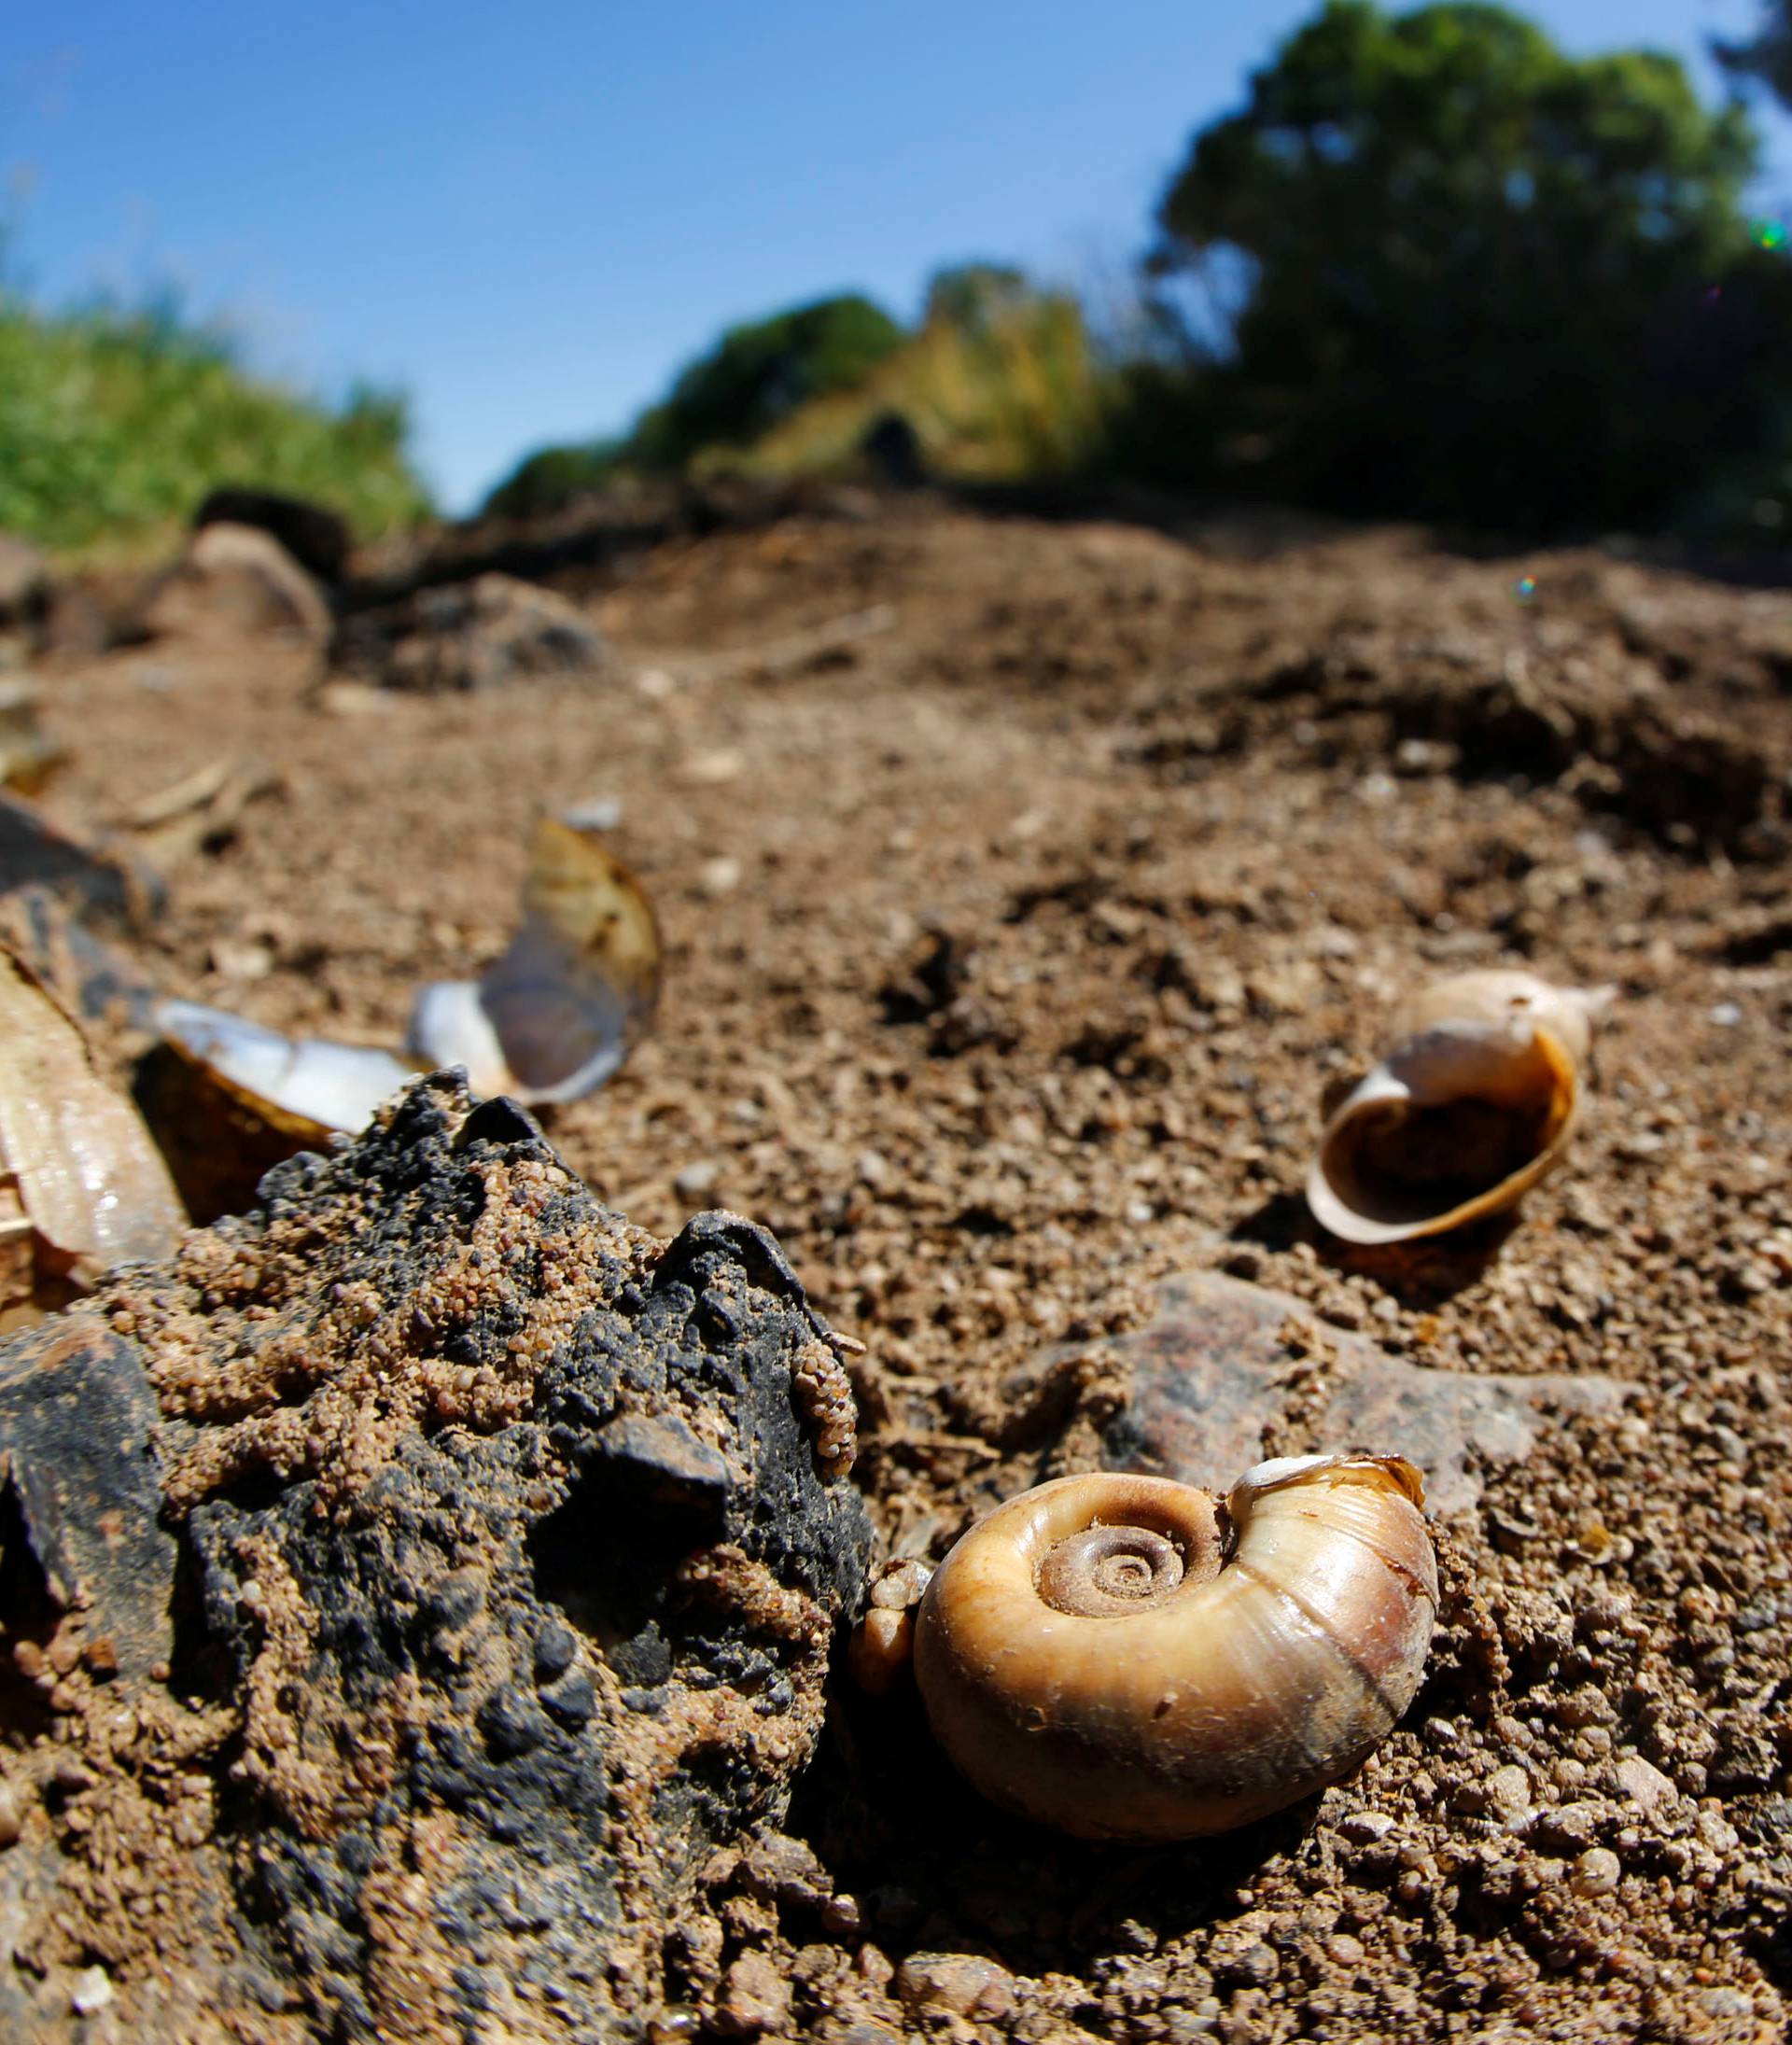 Shells are seen in the the dried riverbed of the river Schwarze Elster (Black Elster) in Senftenberg